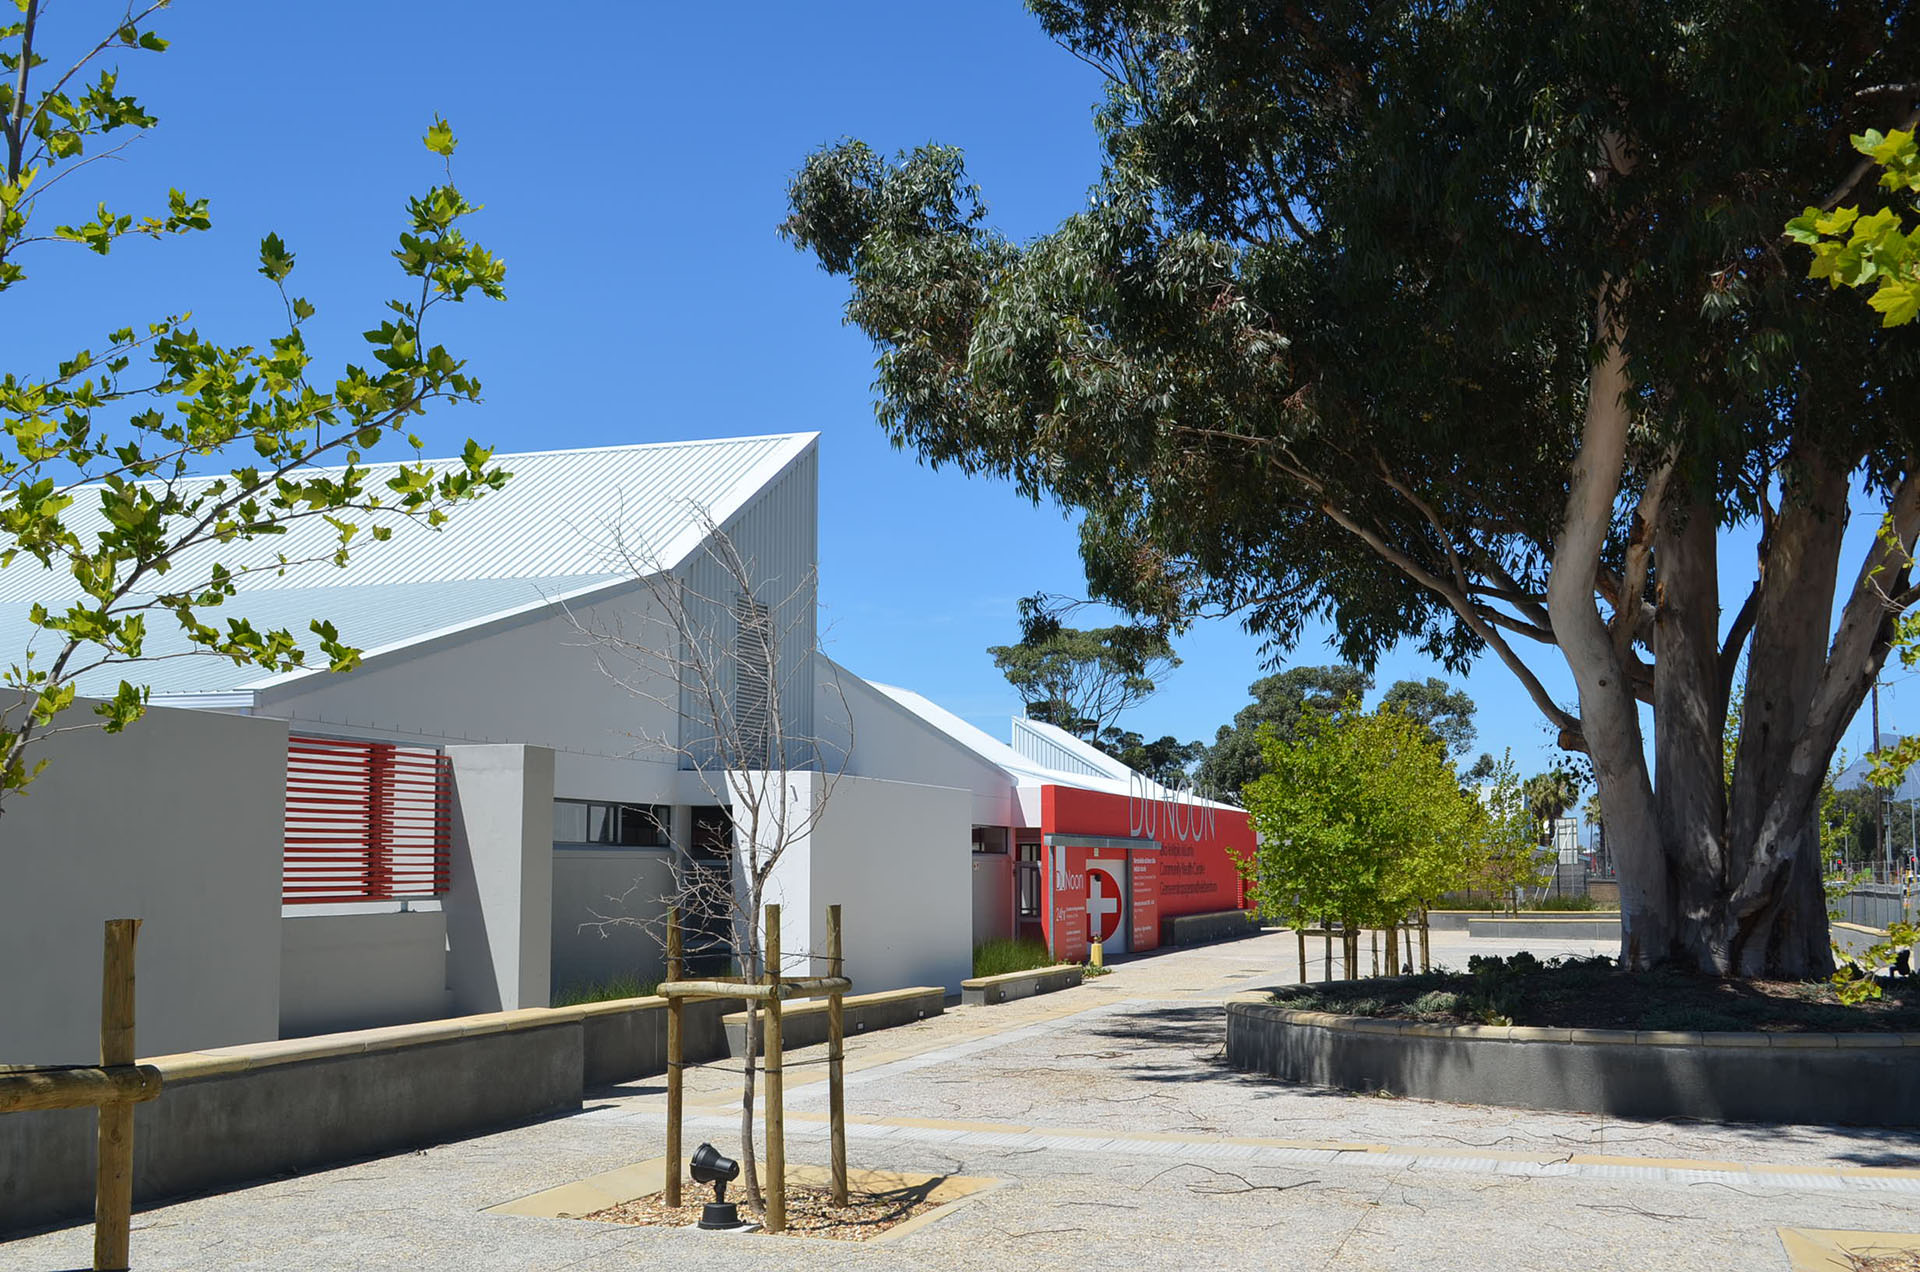 <p>Public forecourt with existing tree and seating. This new health facility provides for the needs of the community of an overcrowded informal settlement where people live in extreme poverty conditions on the fringe of metropolitan Cape Town.</p>